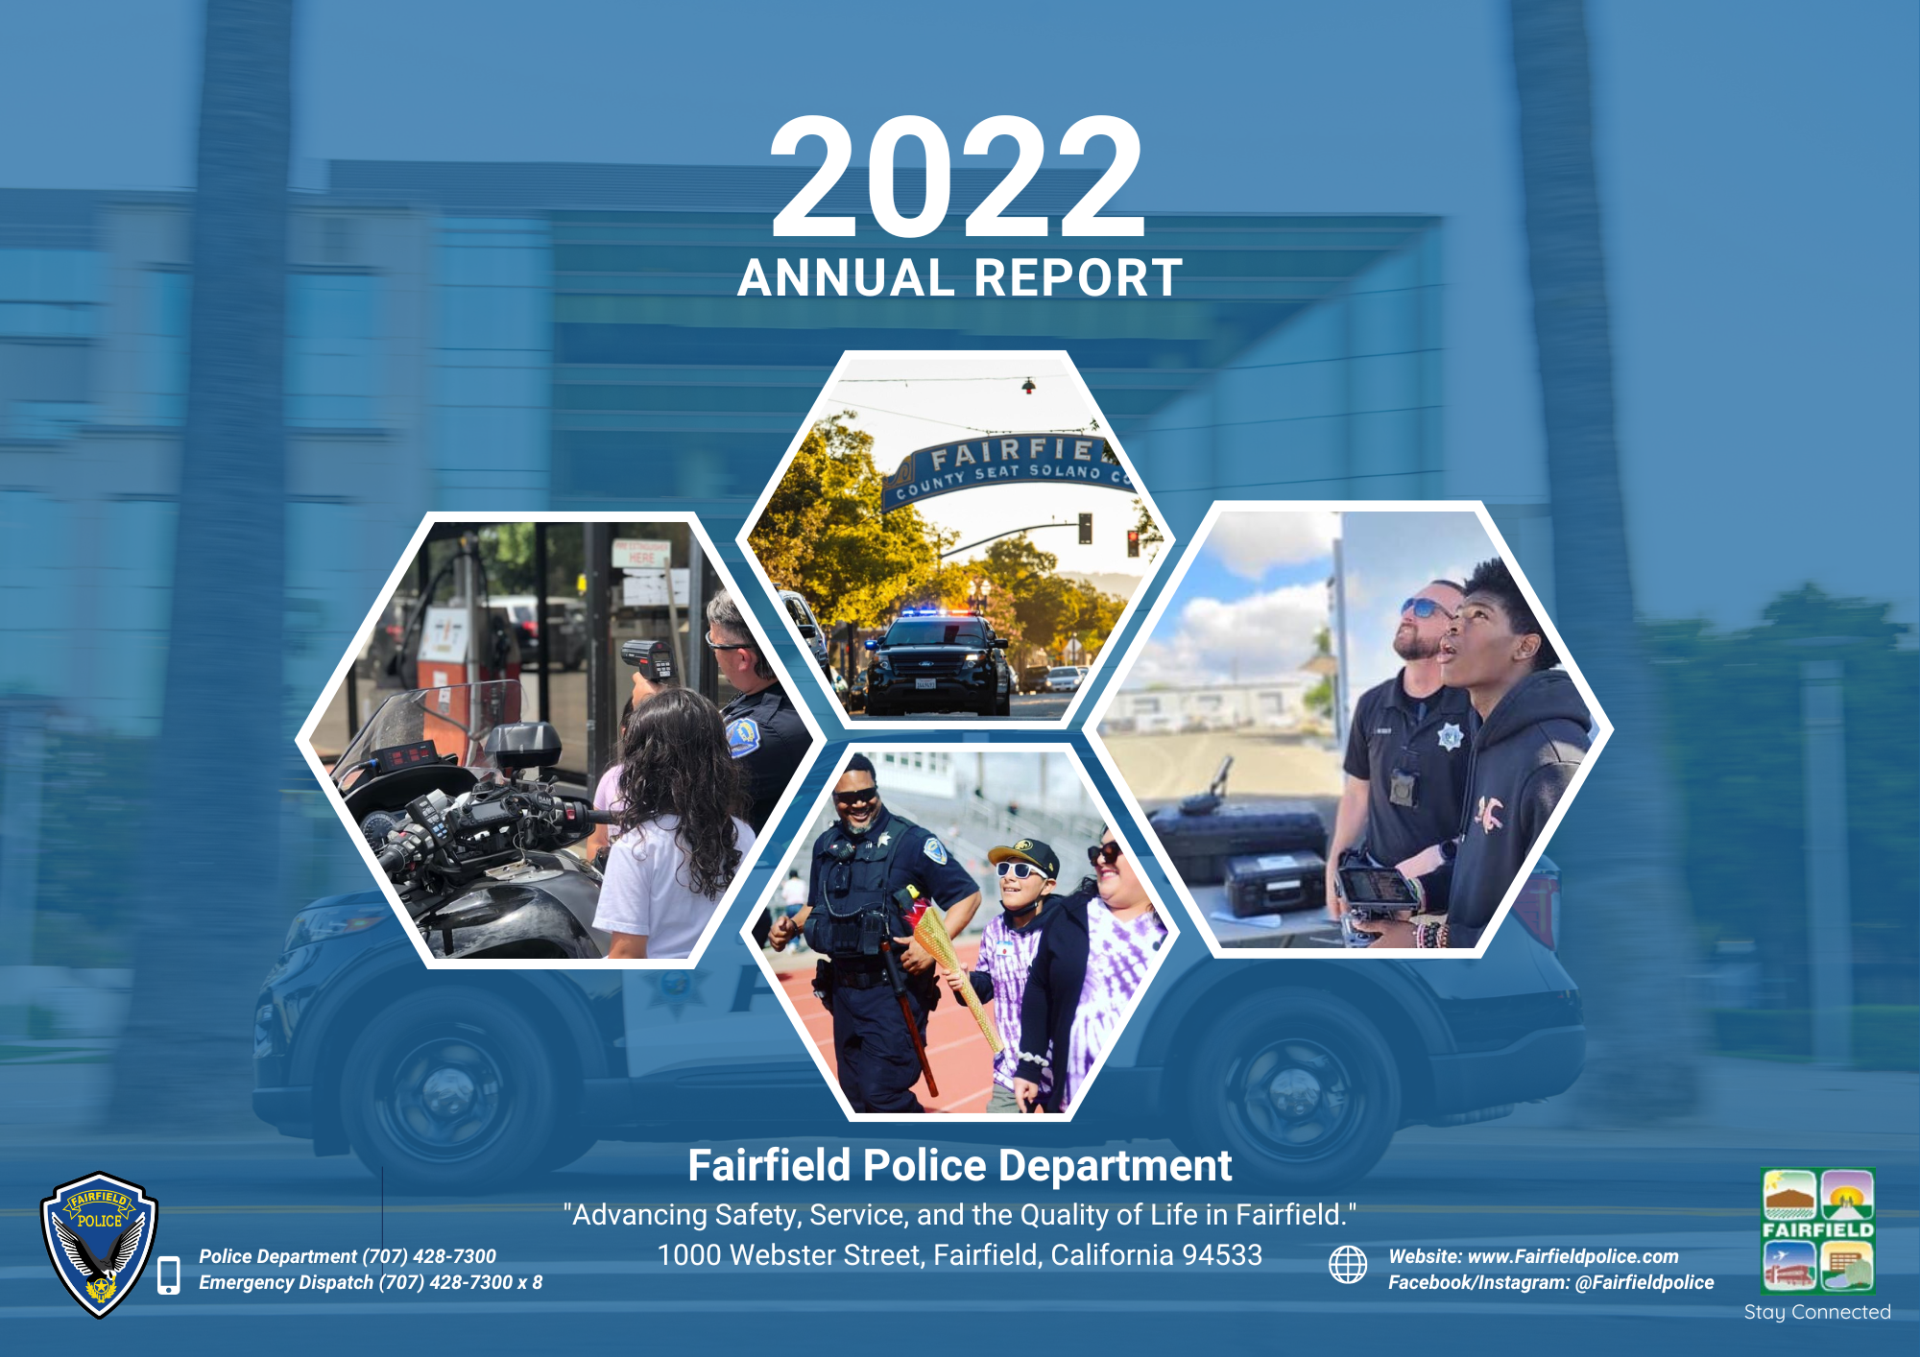 Image of 2022 Annual Report